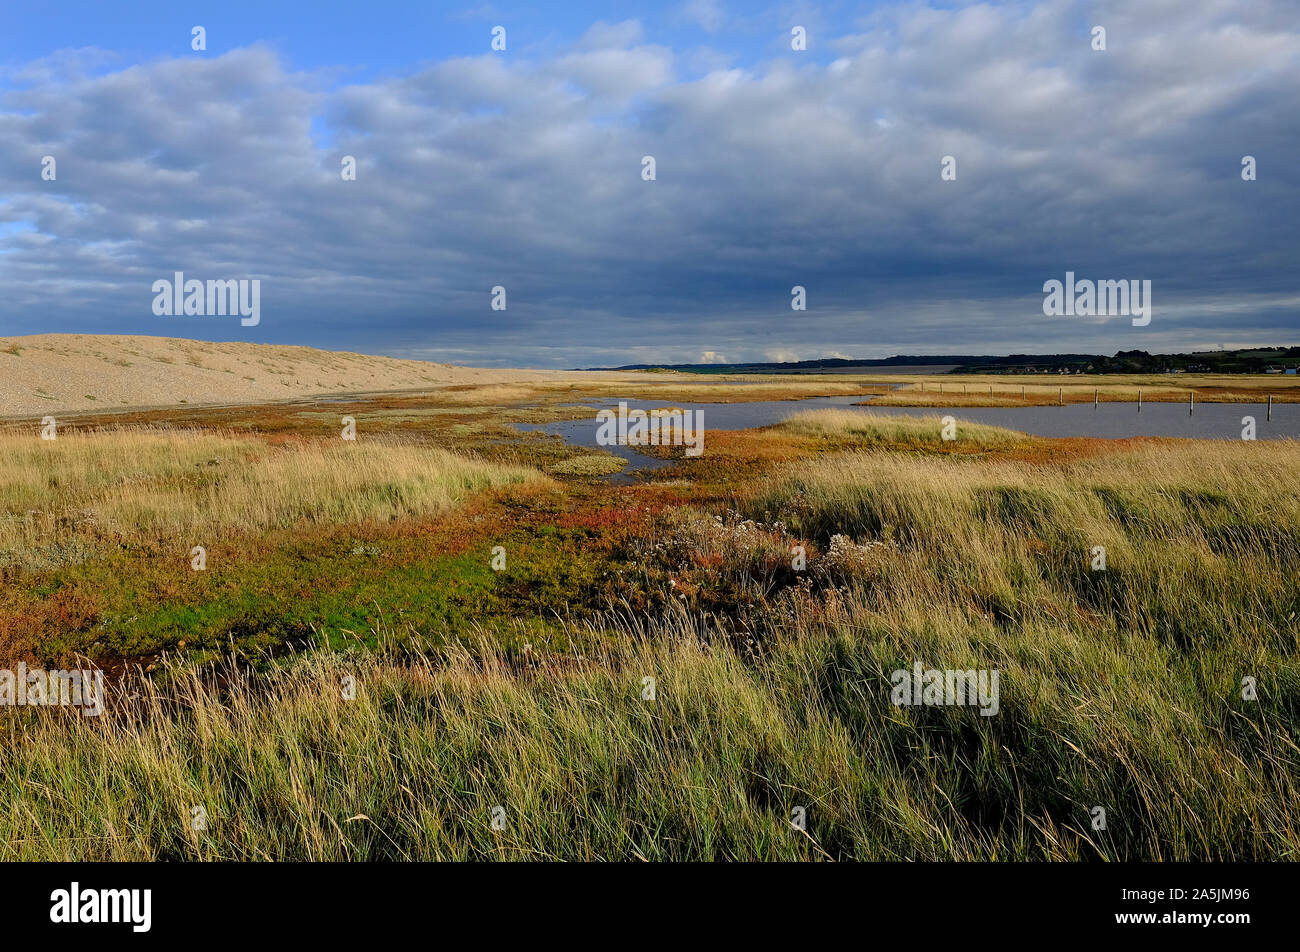 salthouse marshes, north norfolk, england Stock Photo